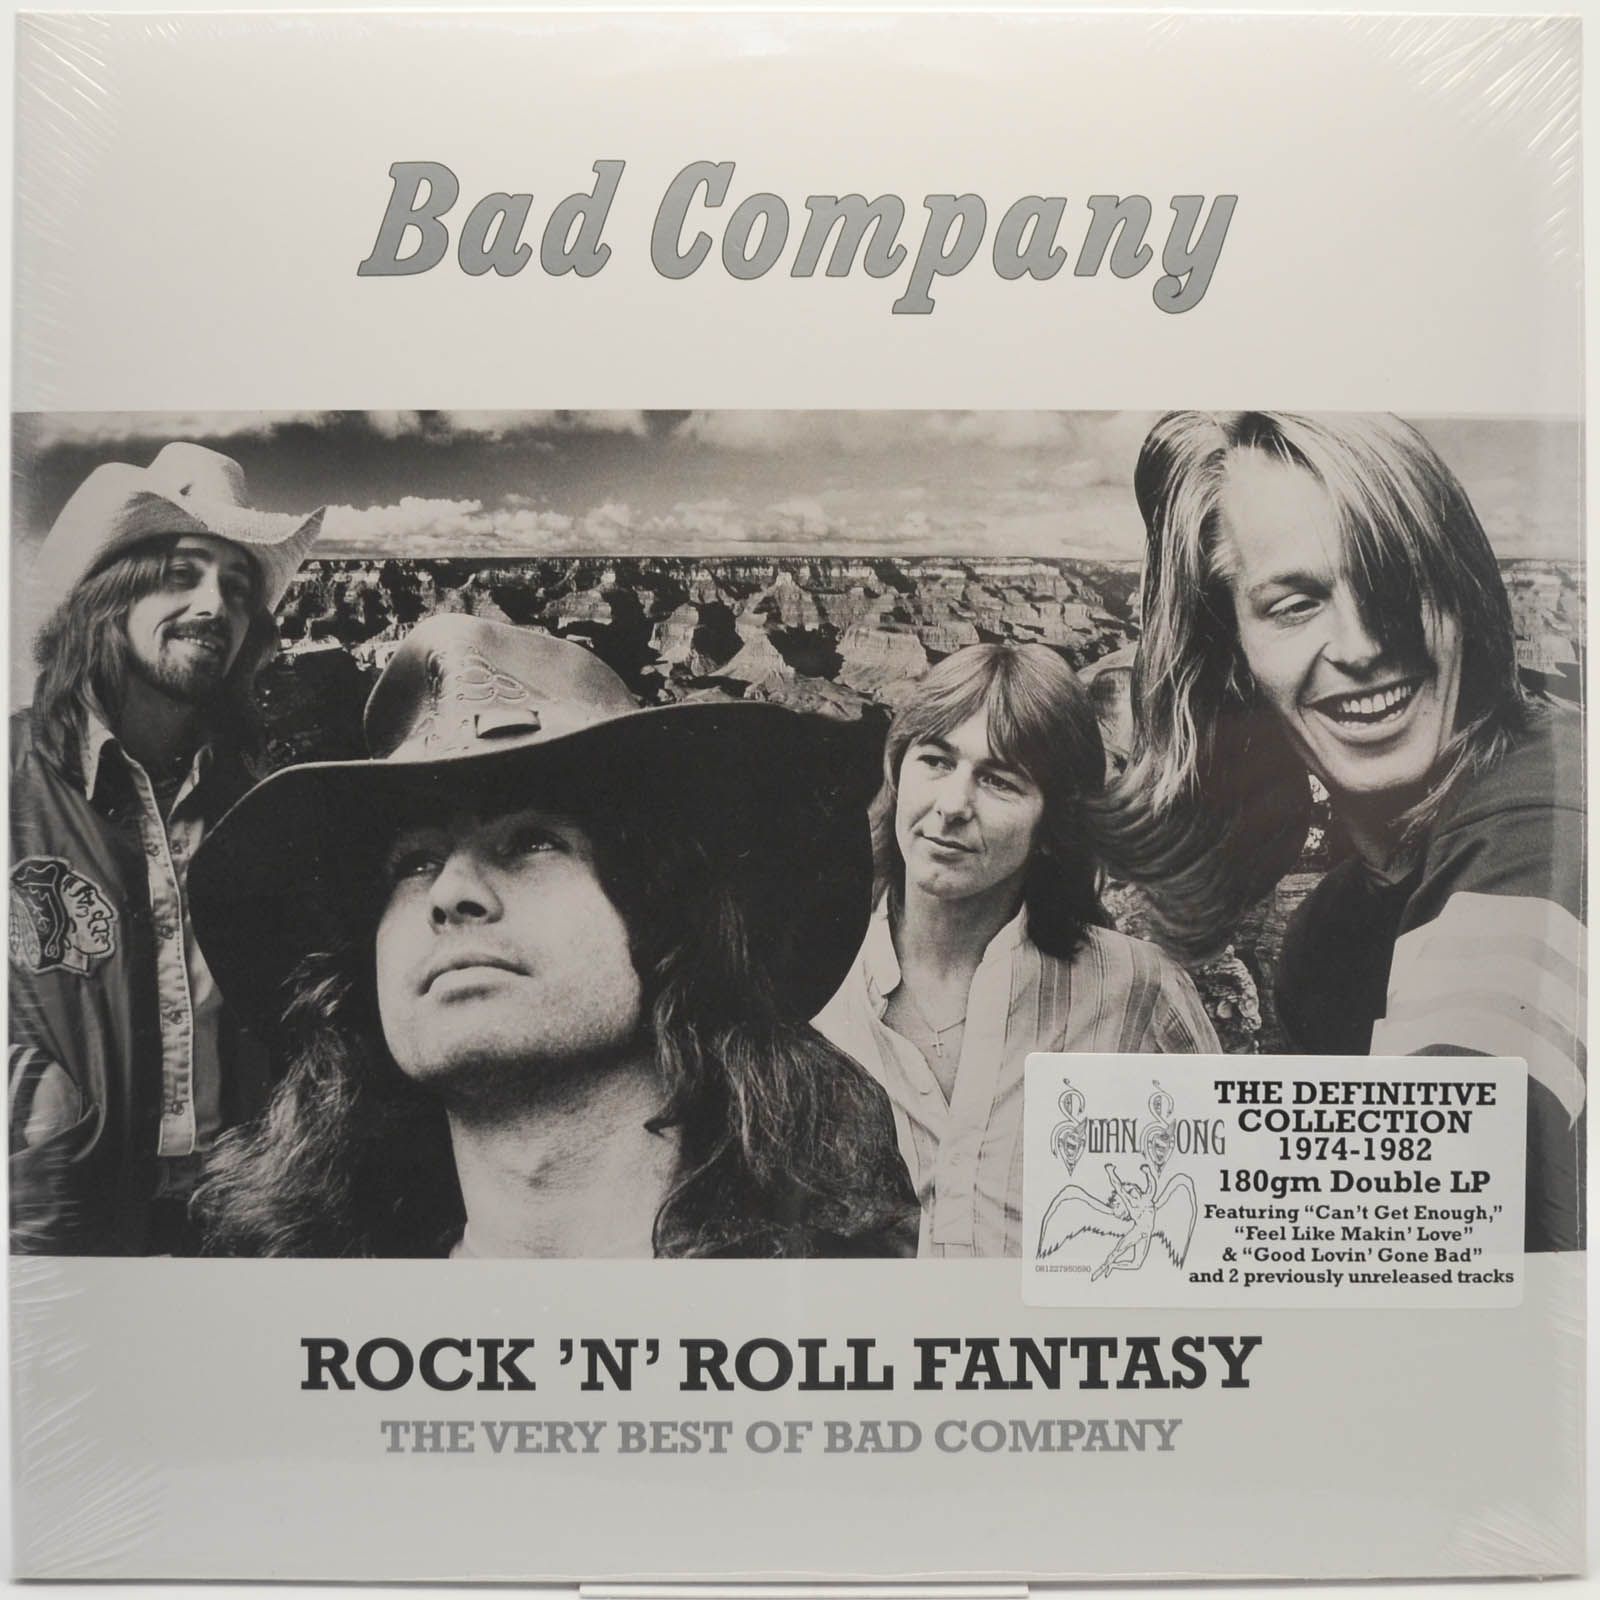 Rock 'n' Roll Fantasy The Very Best Of Bad Company (2LP), 2016